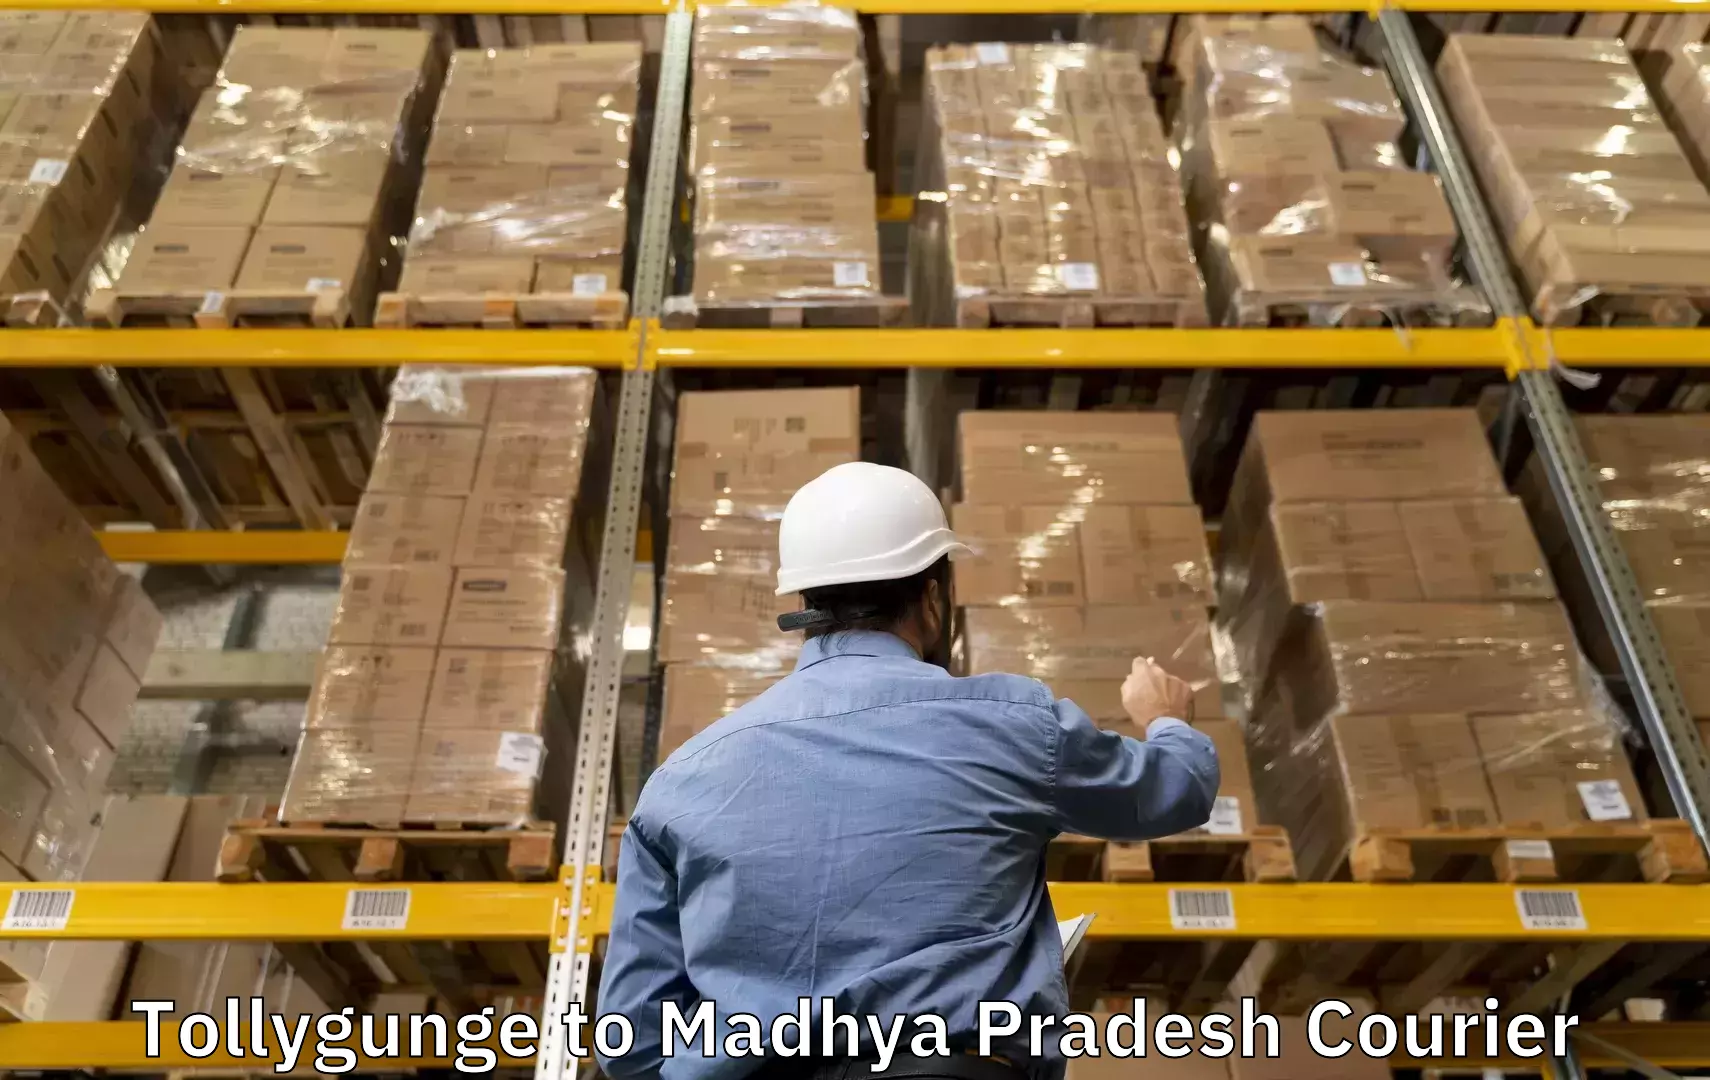 Baggage shipping experience Tollygunge to Beohari